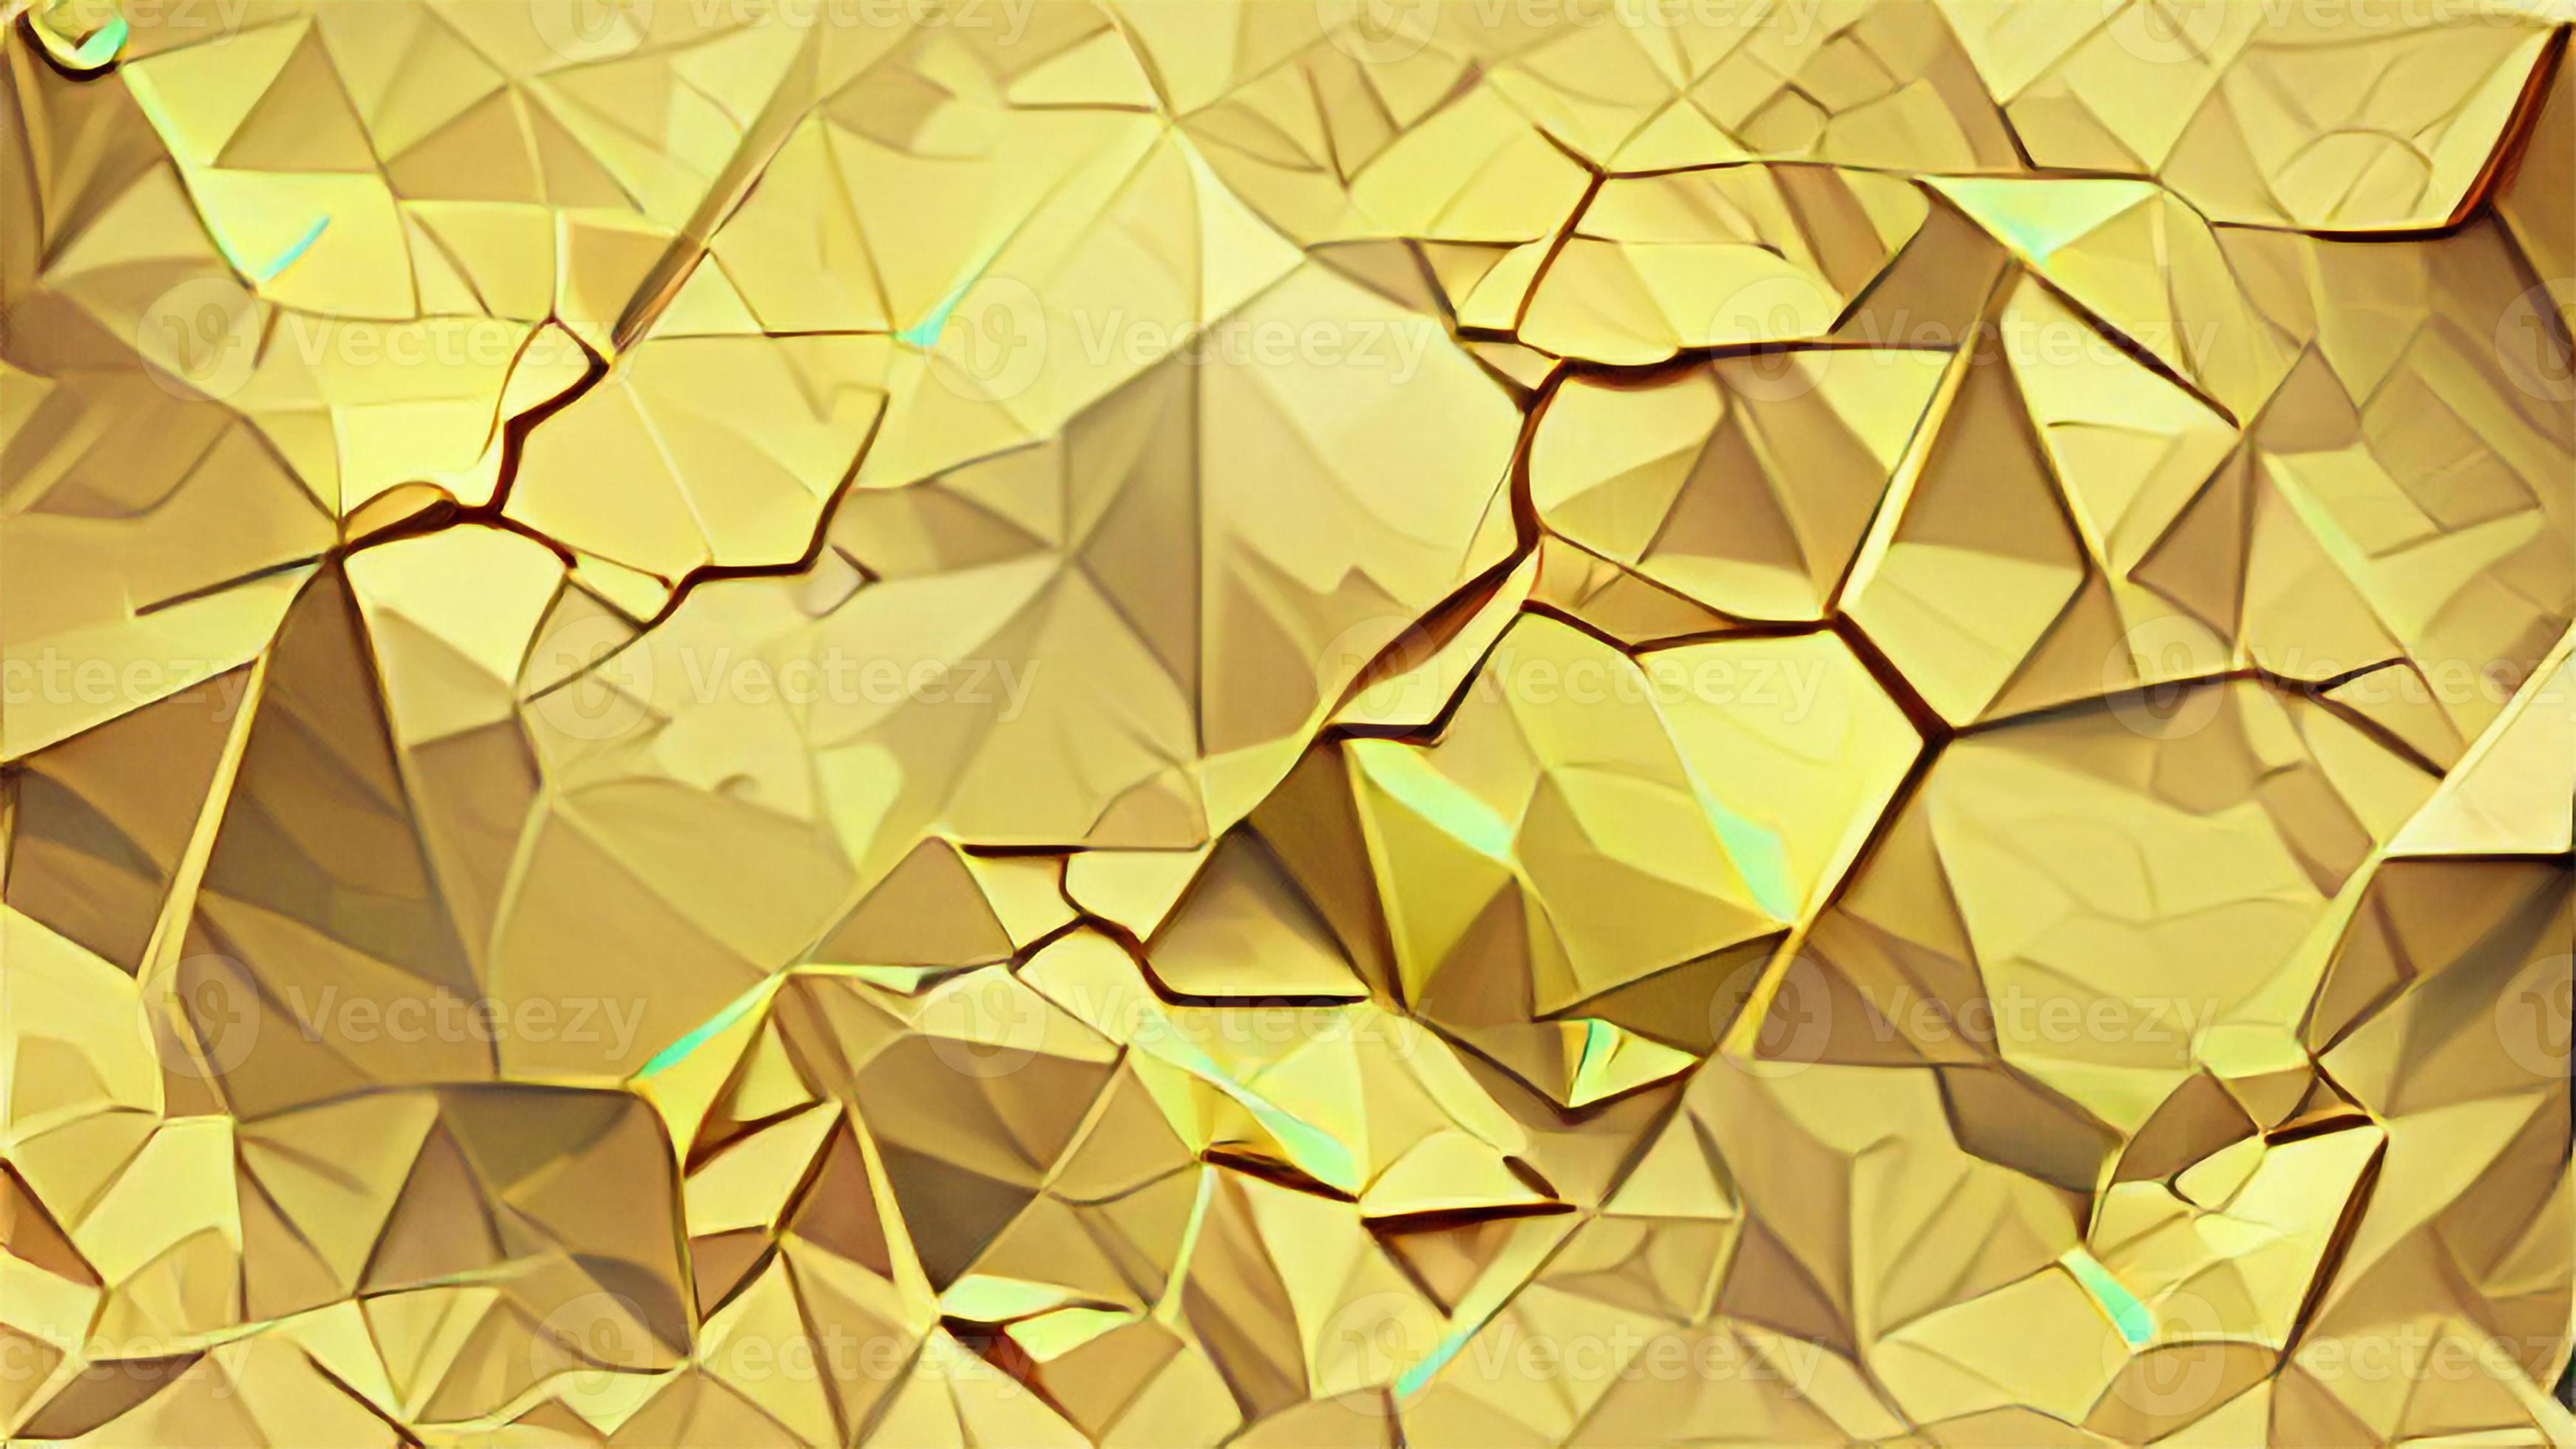 Abstract Geometric Gold Tone Texture Crystal Backgrounds For Graphic Design  10554694 Stock Photo at Vecteezy